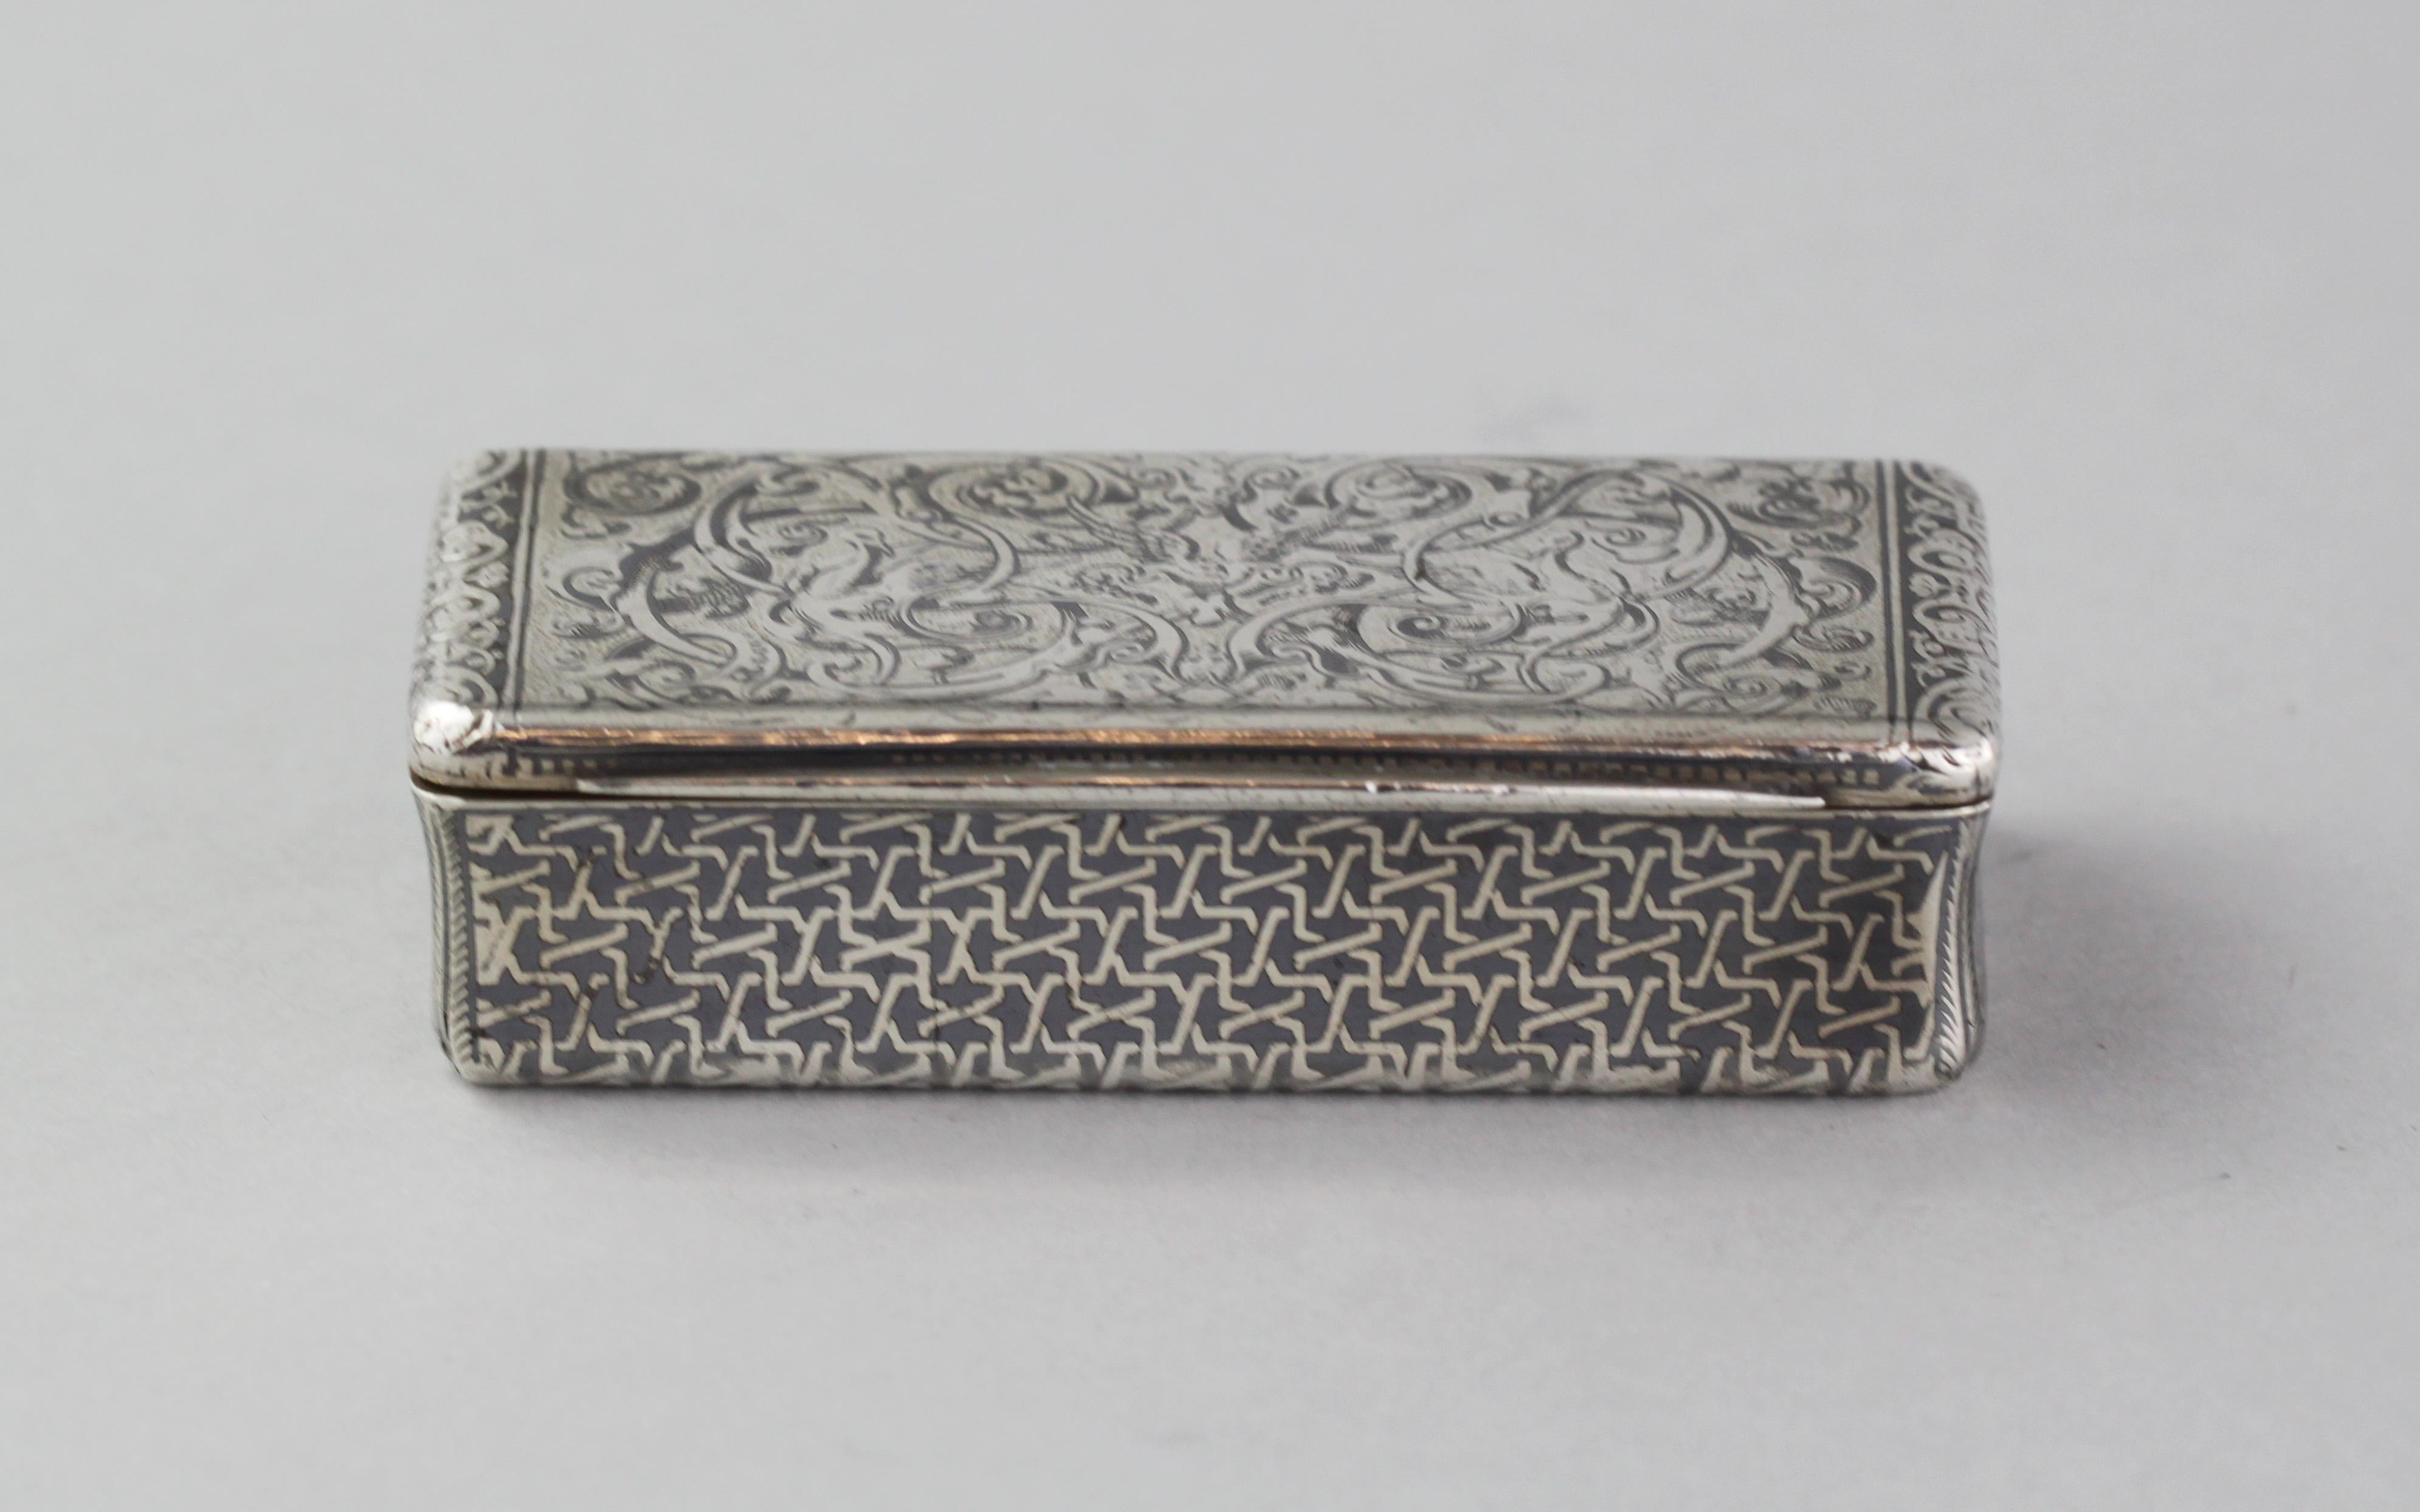 French silver niello snuff box, 19th century

Made in France, circa 1880.

Marked with the Minerva head and number 2 denoting its 800 grade silver, makers mark is partialy rubbed so we can not determine the maker.

Size: 7.8 x 3.3 x 2